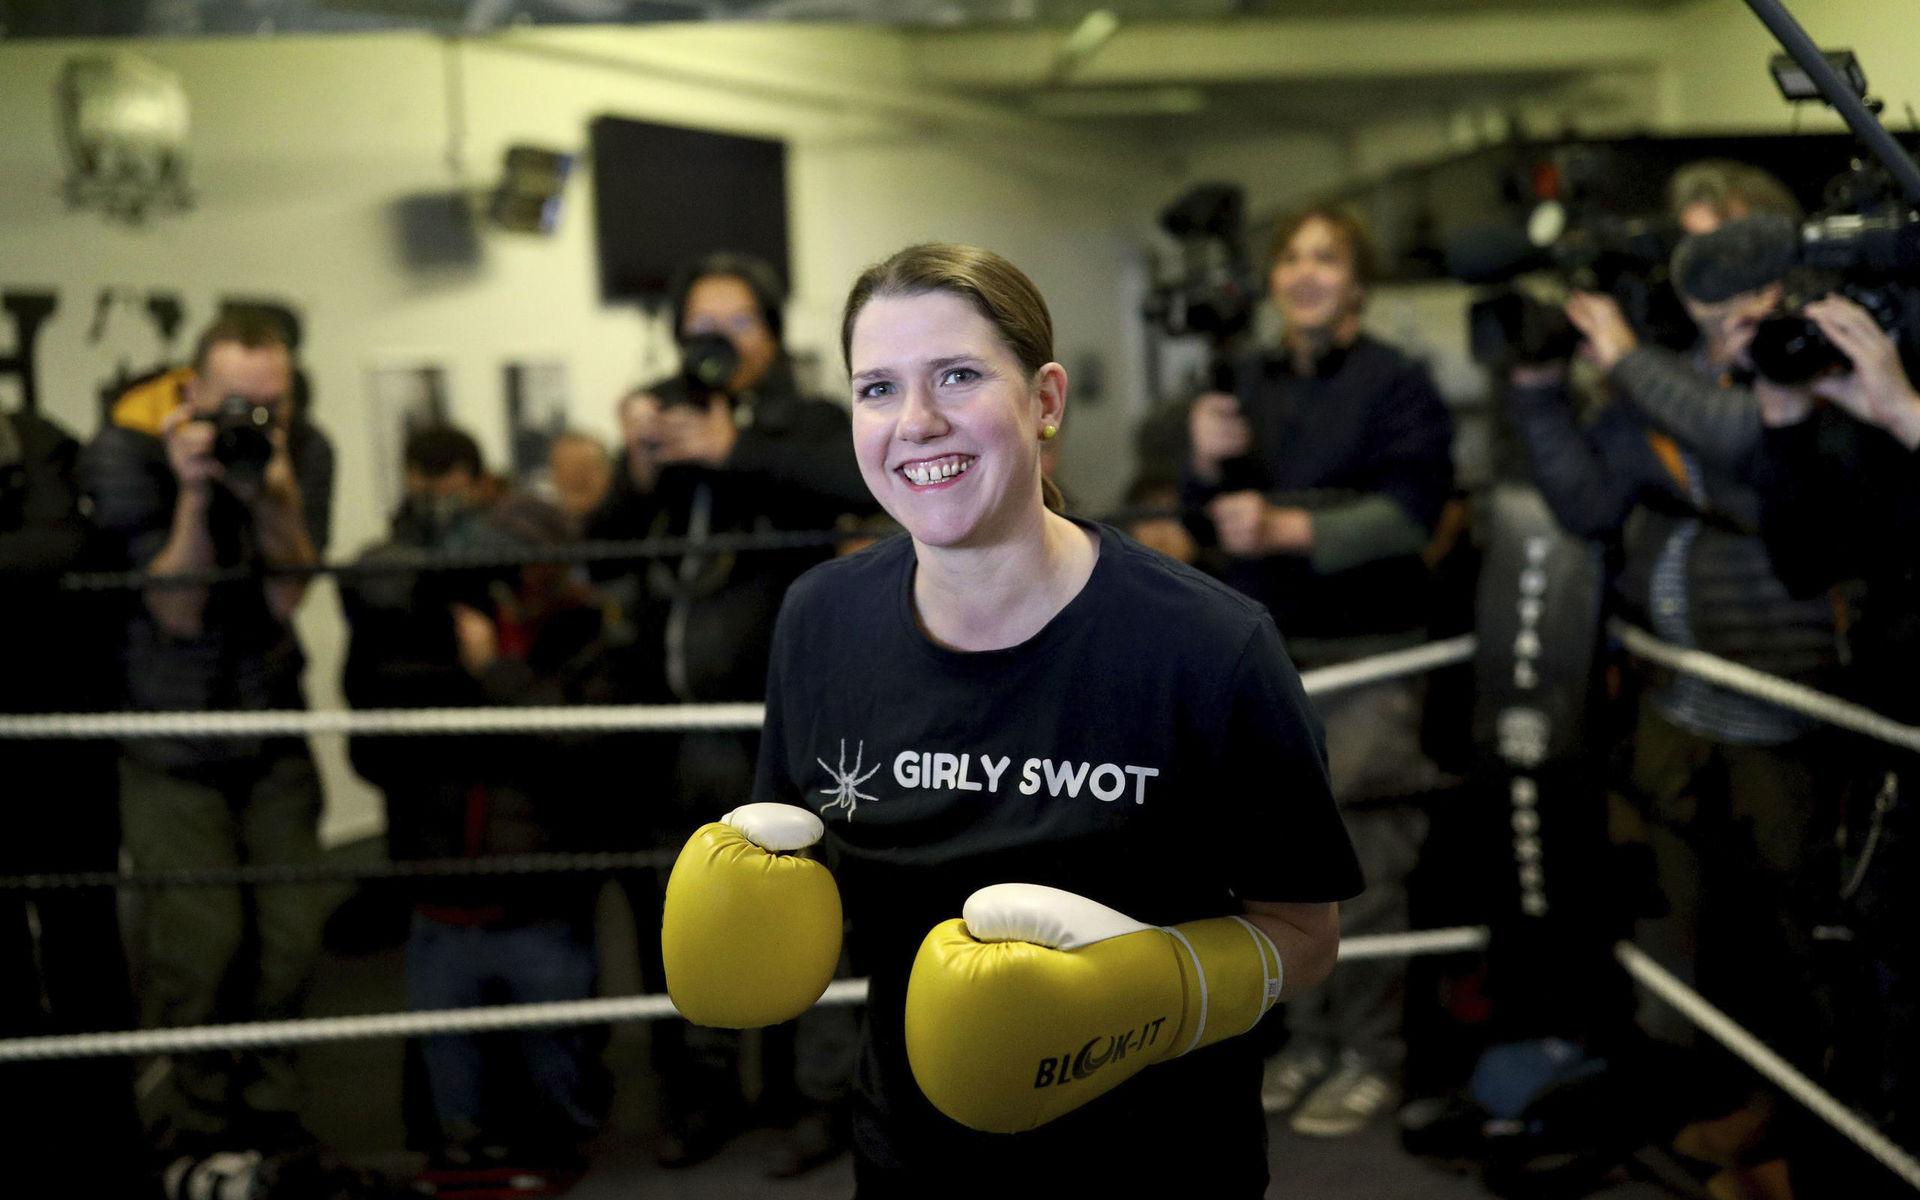 Britain&apos;s opposition party Liberal Democrats leader Jo Swinson visits boxing gym Total Boxer, which offers training to young people as a means of keeping them away from violence, during General Election campaigning in London, Wednesday Nov. 13,2019. Britain&apos;s Brexit is one of the main issues for voters and political parties as the UK goes to the polls in a General Election on Dec. 12. (Aaron Chown/PA via AP)  LON813